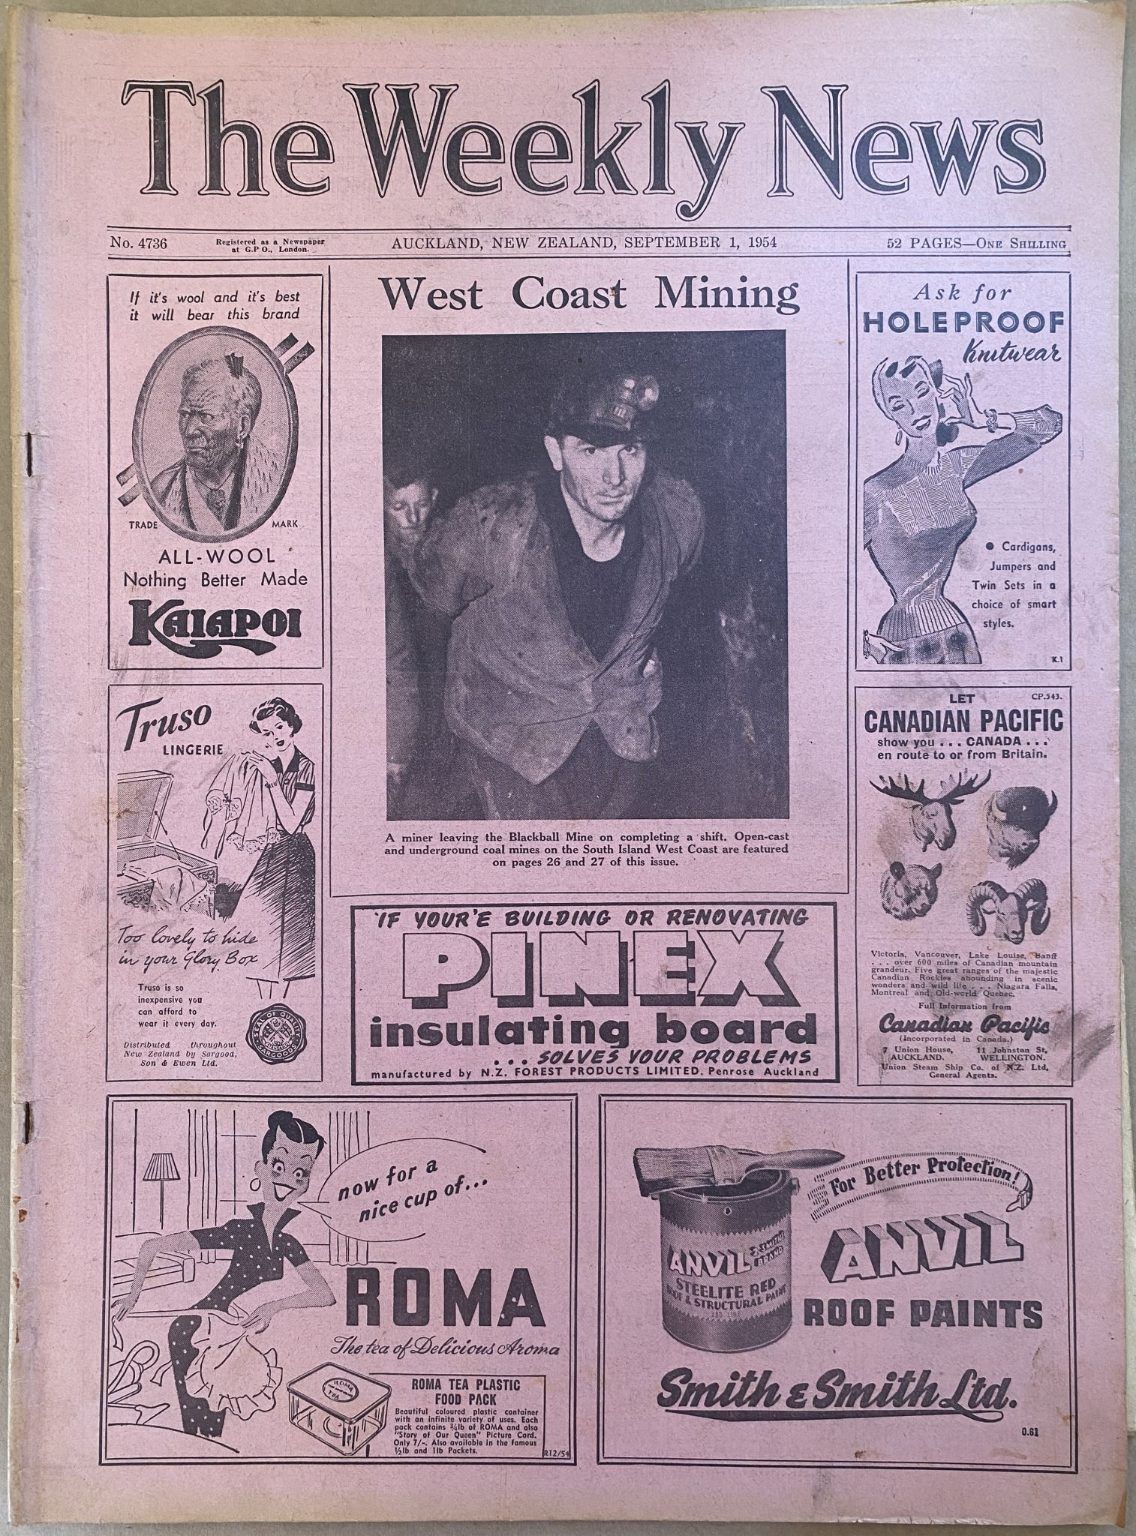 OLD NEWSPAPER: The Weekly News - No. 4736, 1 September 1954